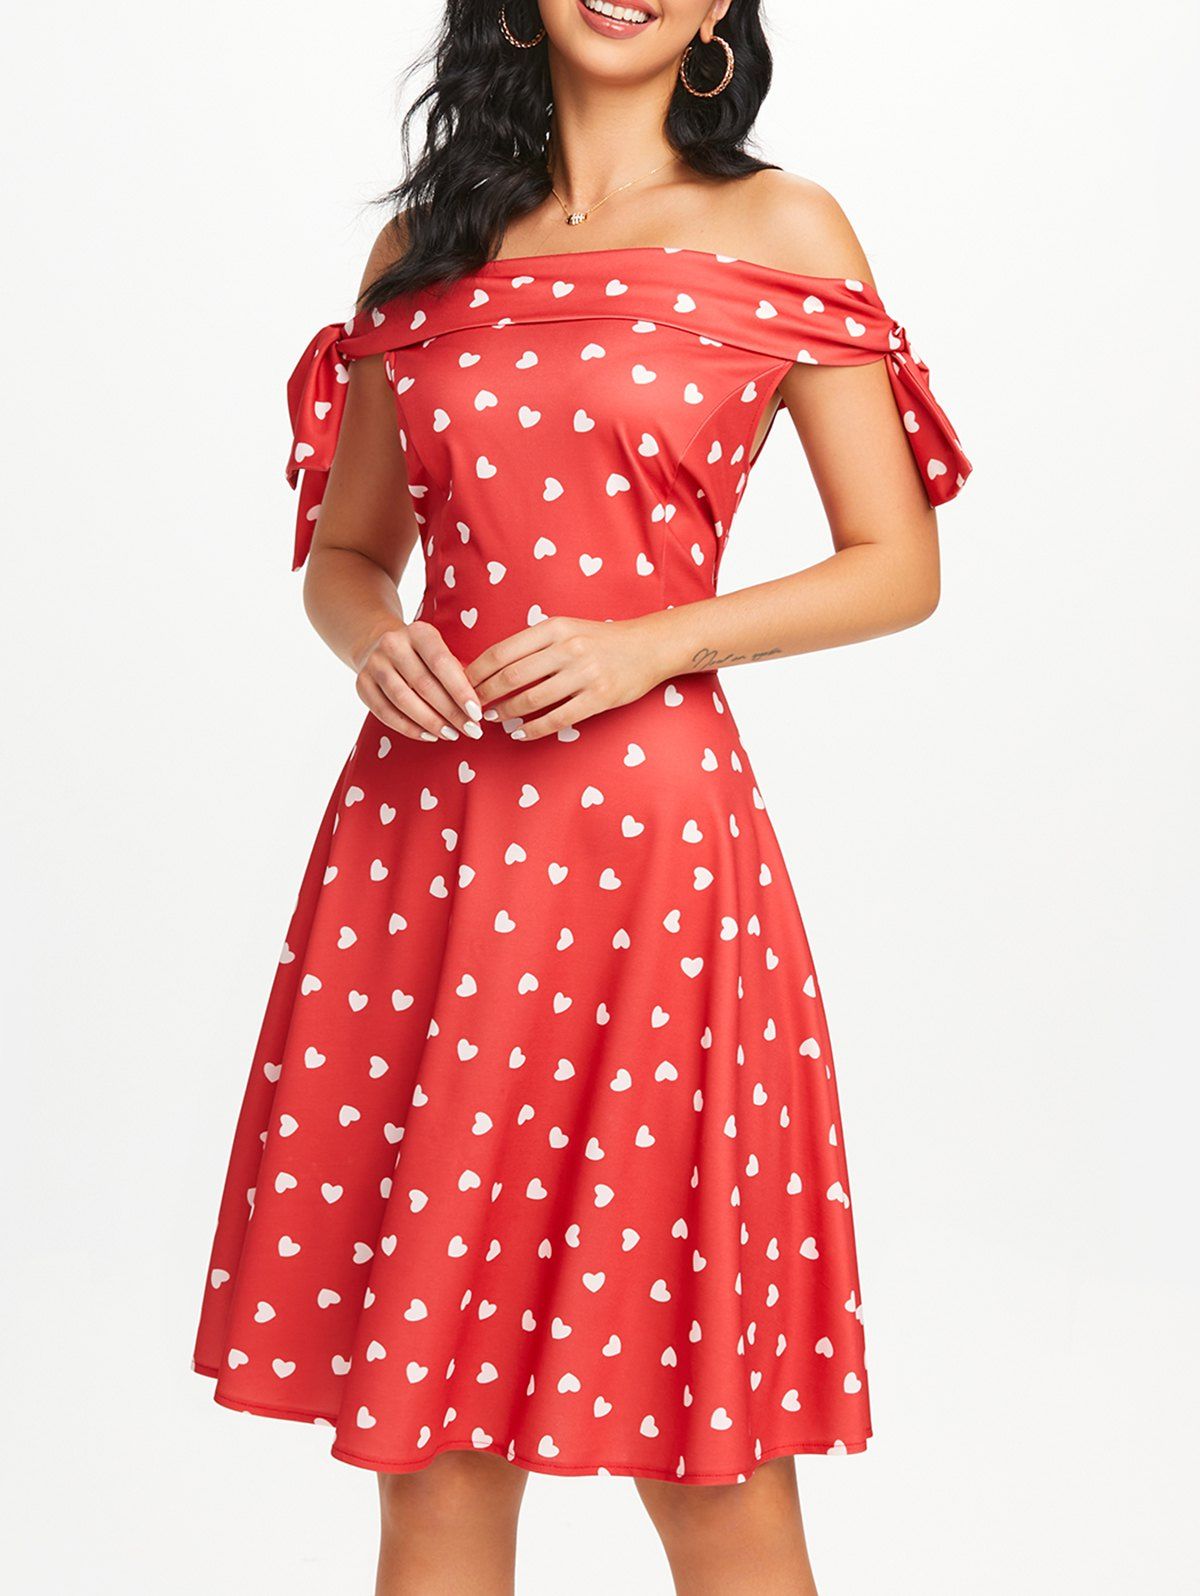 Off Shoulder Heart Print Knotted Dress - RED M